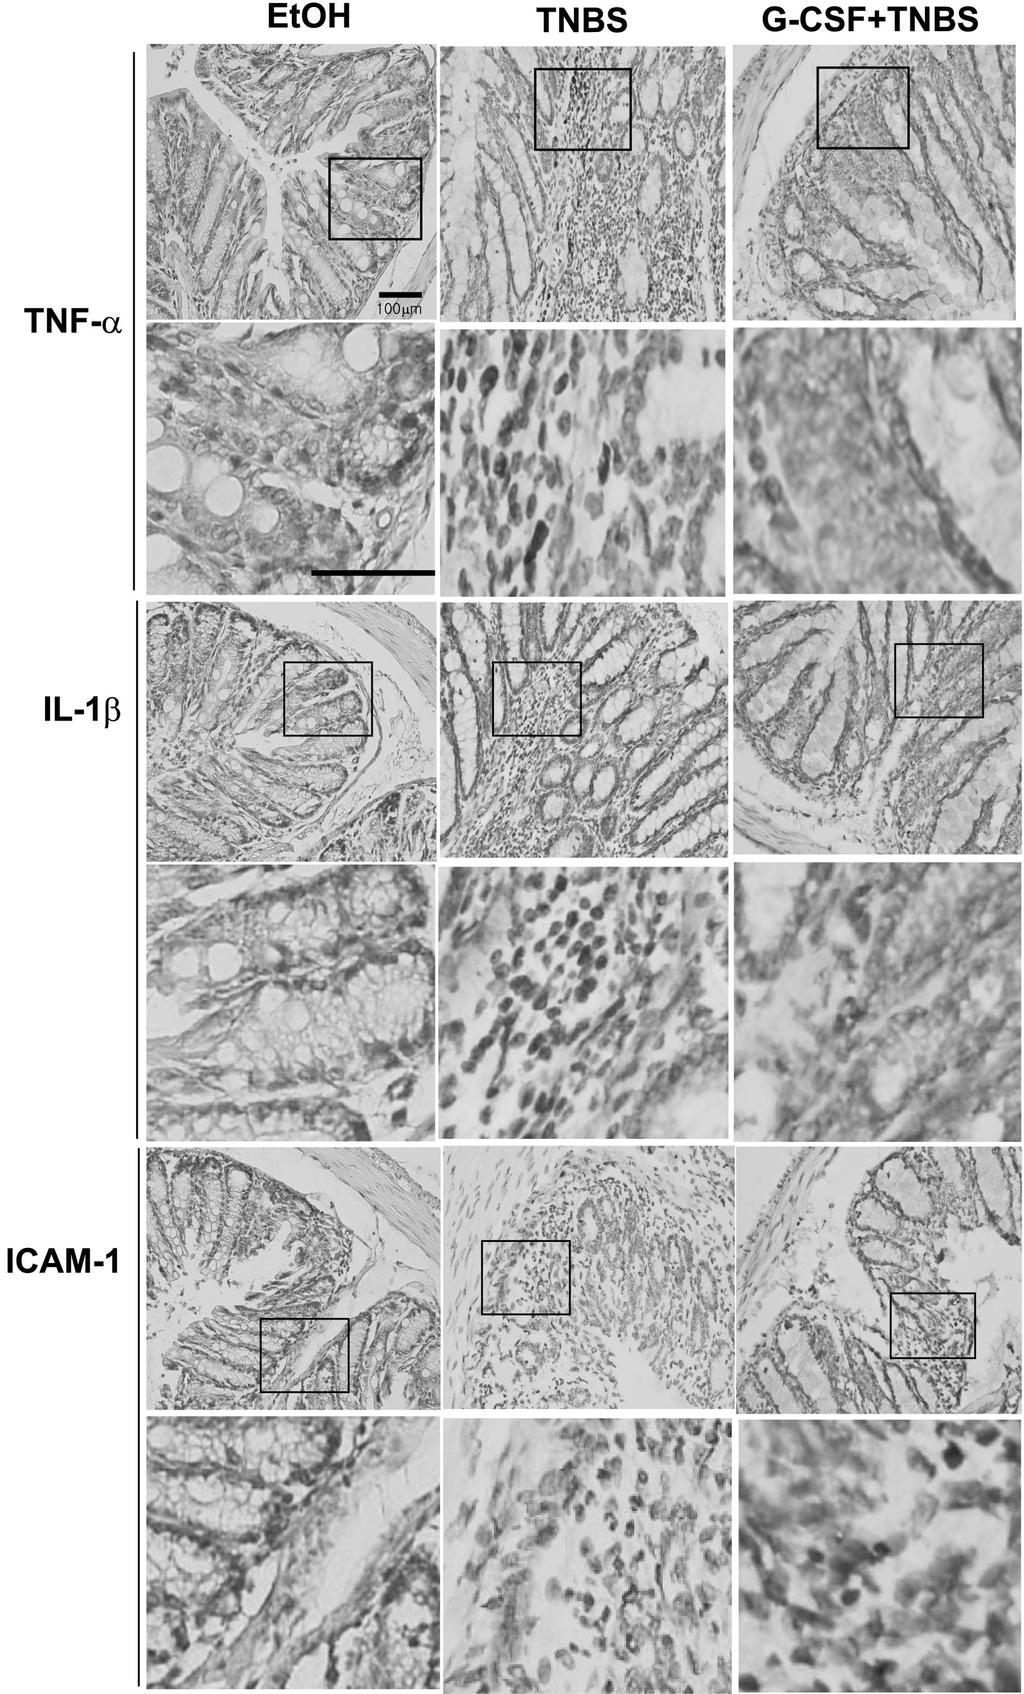 G-CSF Attenuates Inflammatory Bowel Diseases 17 Figure 4. G-CSF reduces the expression of TNF-α IL-1β, and ICAM1 in colonic mucosa of TNBS colitis.